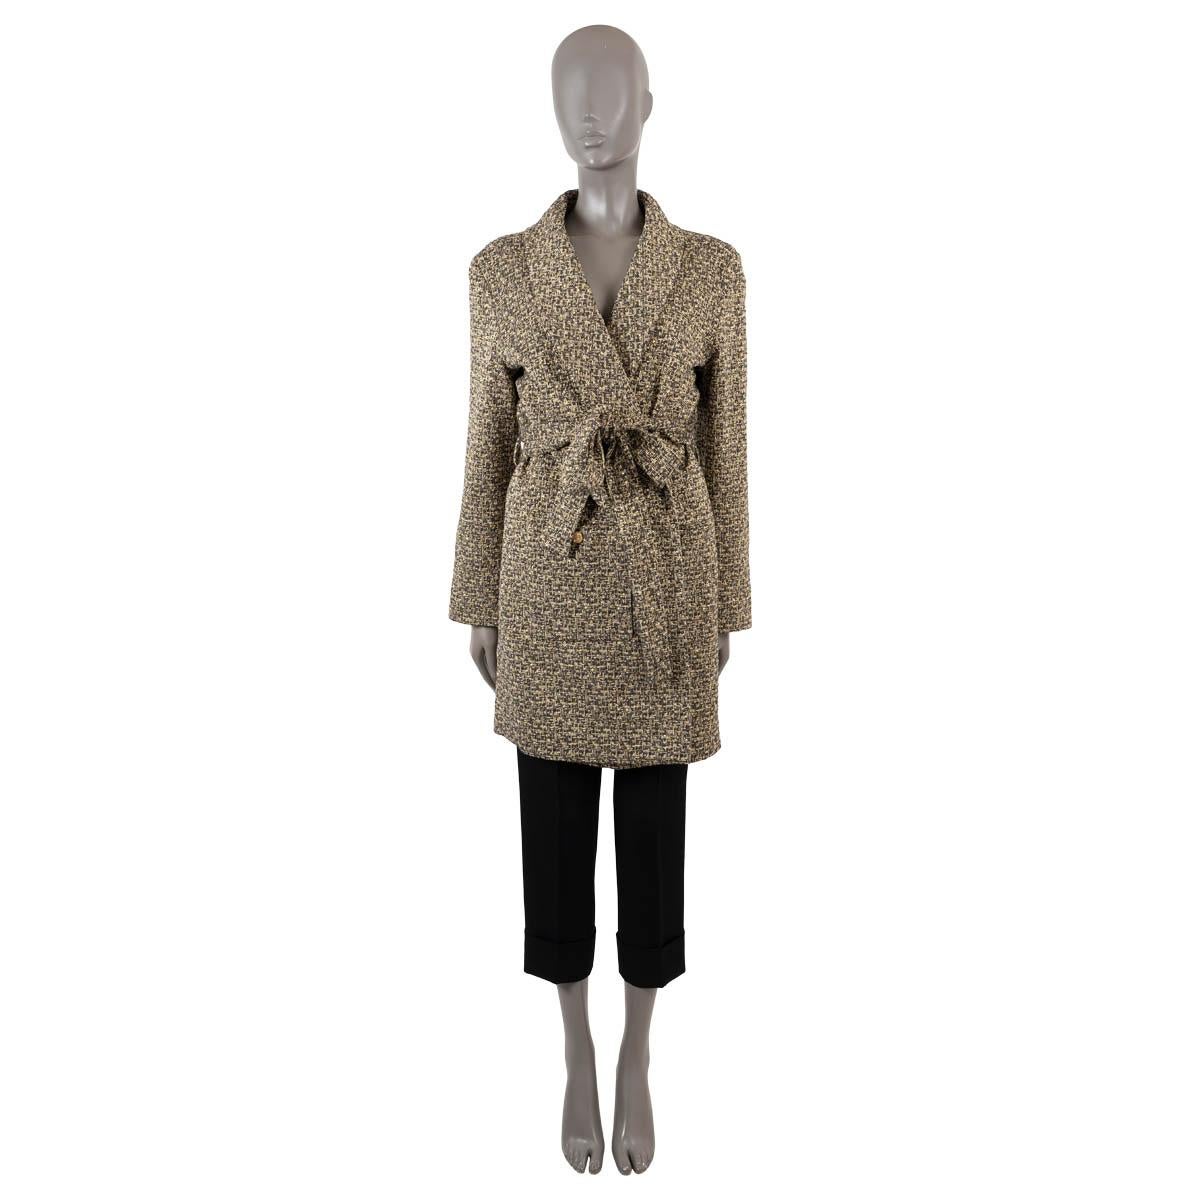 100% authentic Chanel belted tweed coat in metallic gold, beige, grey and black nylon (51%), polyester (40%) and elastane (9%). Features a shawl collar and two buttoned patch pockets at the waist. Closes with a matching tweed self-tie belt. Lined in